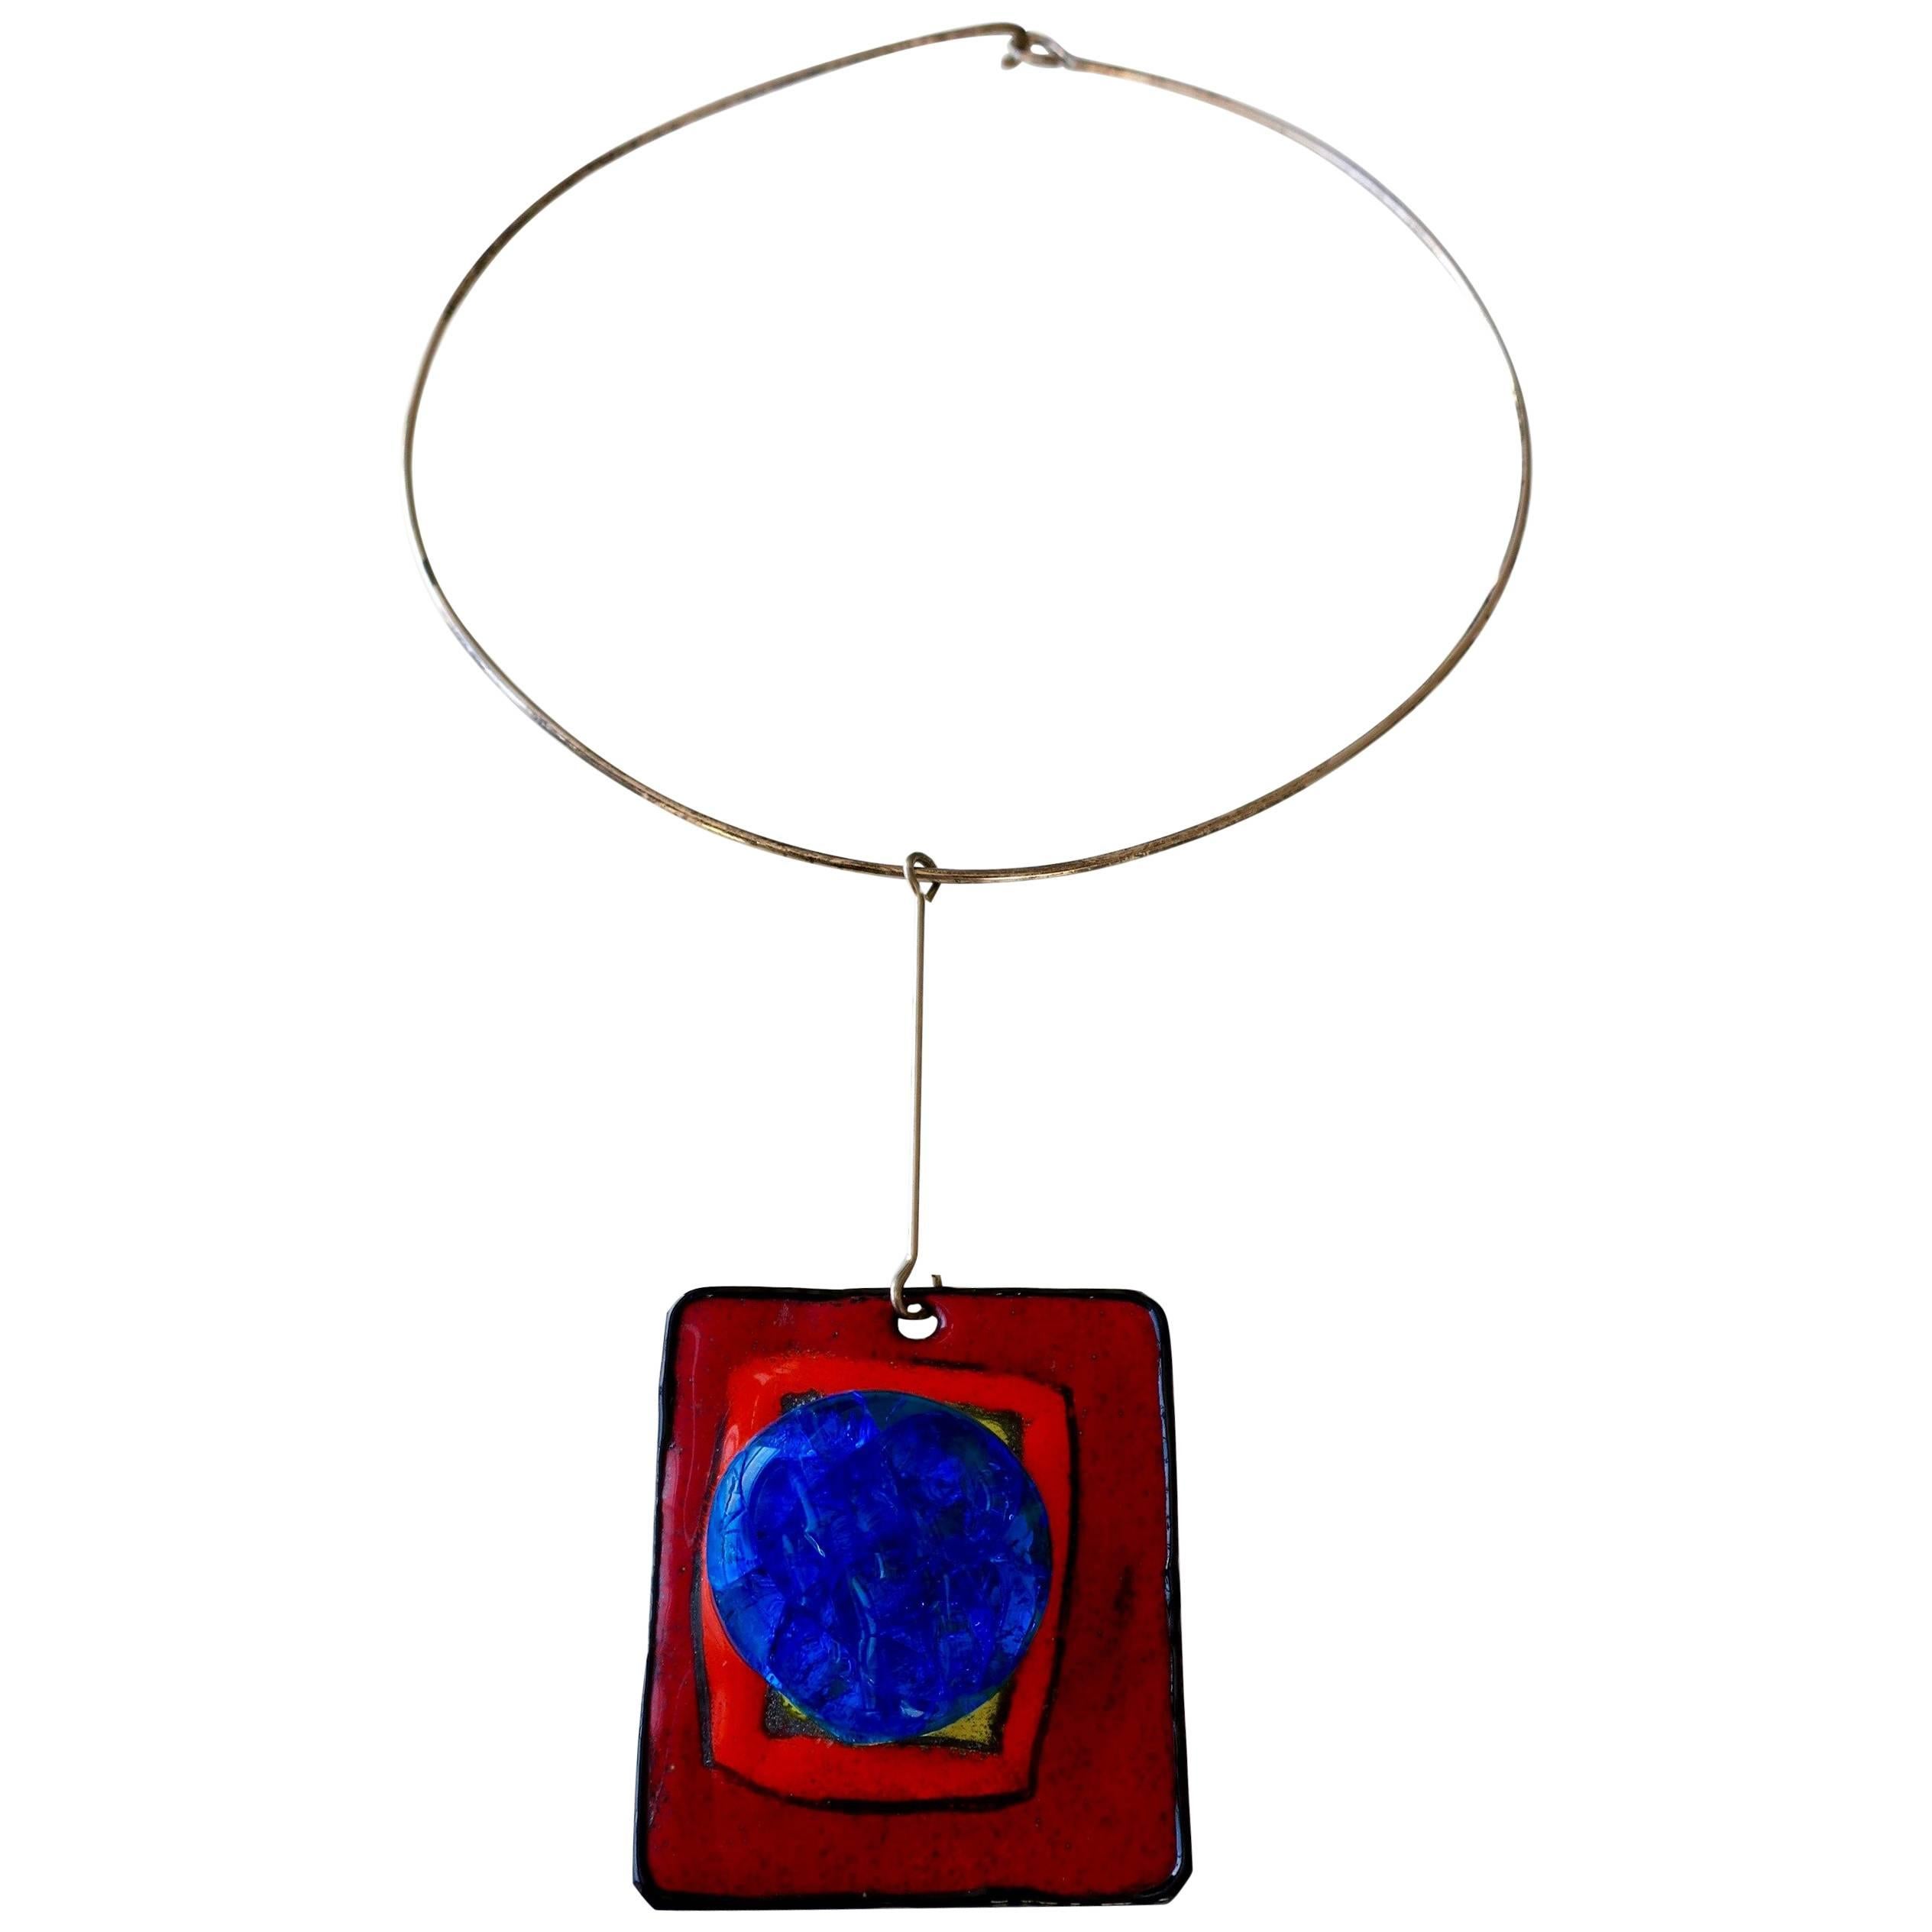 Pierre Cardin Silver Enamel and Glass Pendant Necklace, French, circa 1965 For Sale